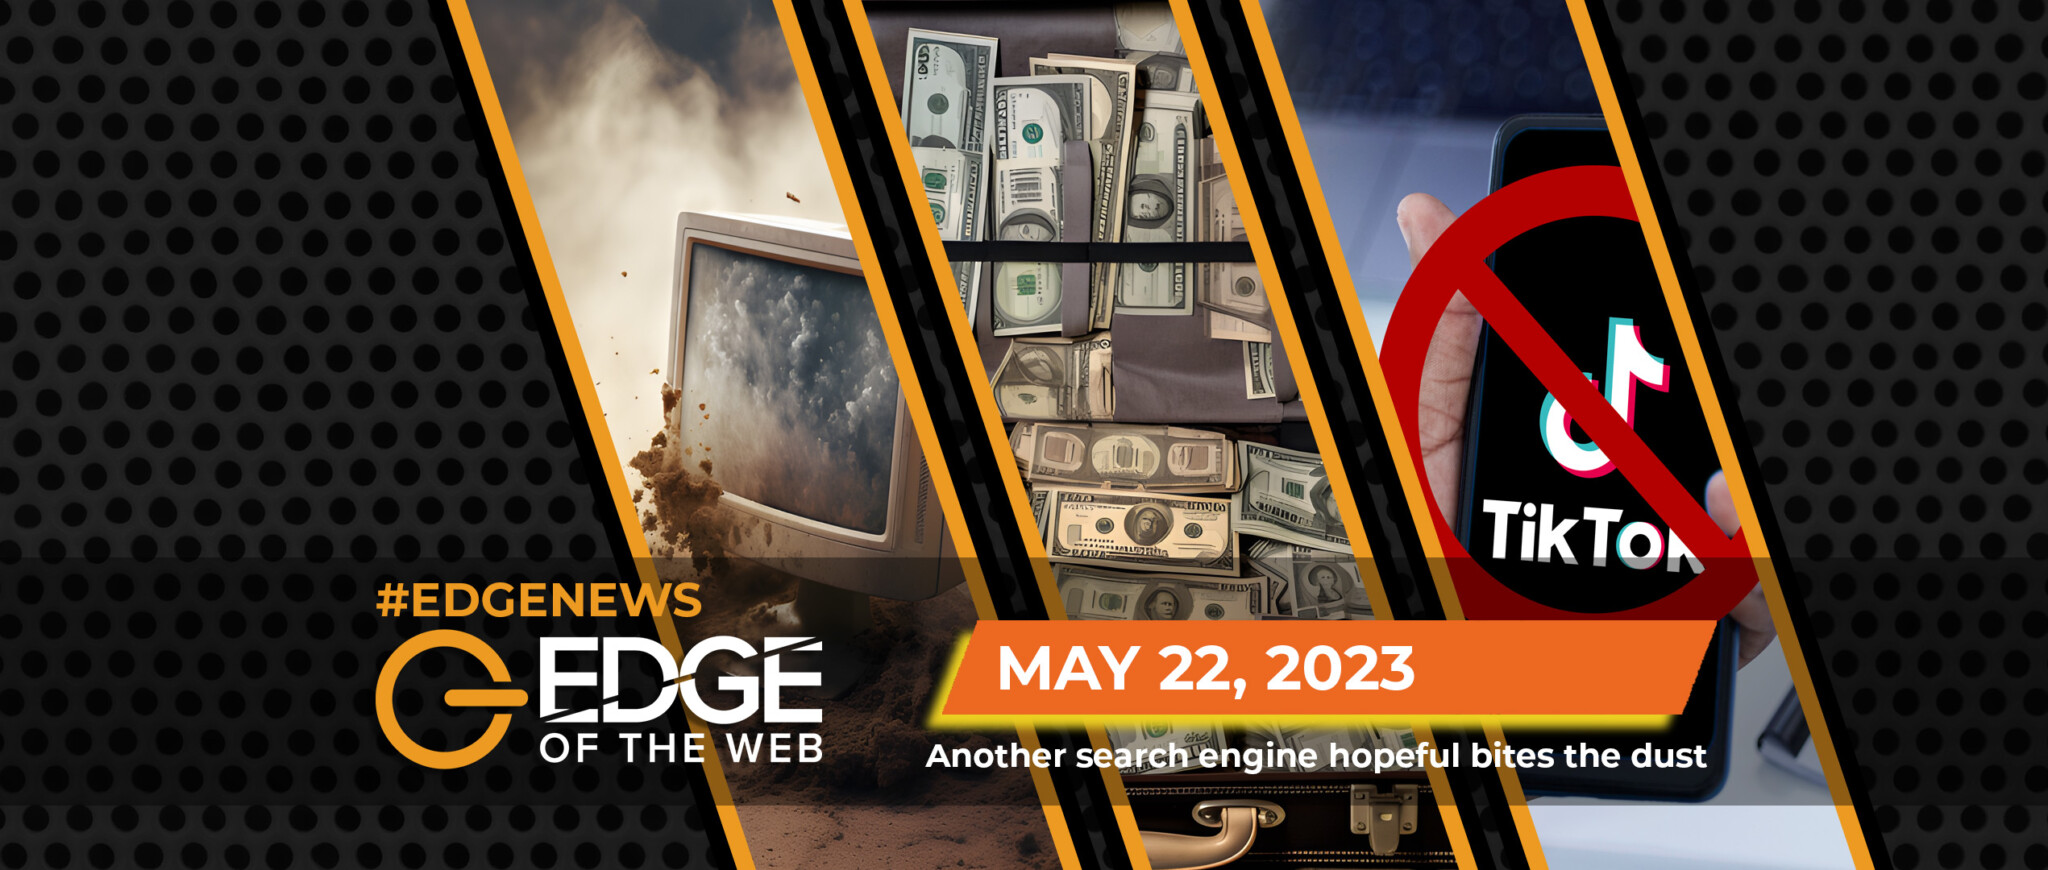 595 | News from the EDGE | Week of 5.22.2023